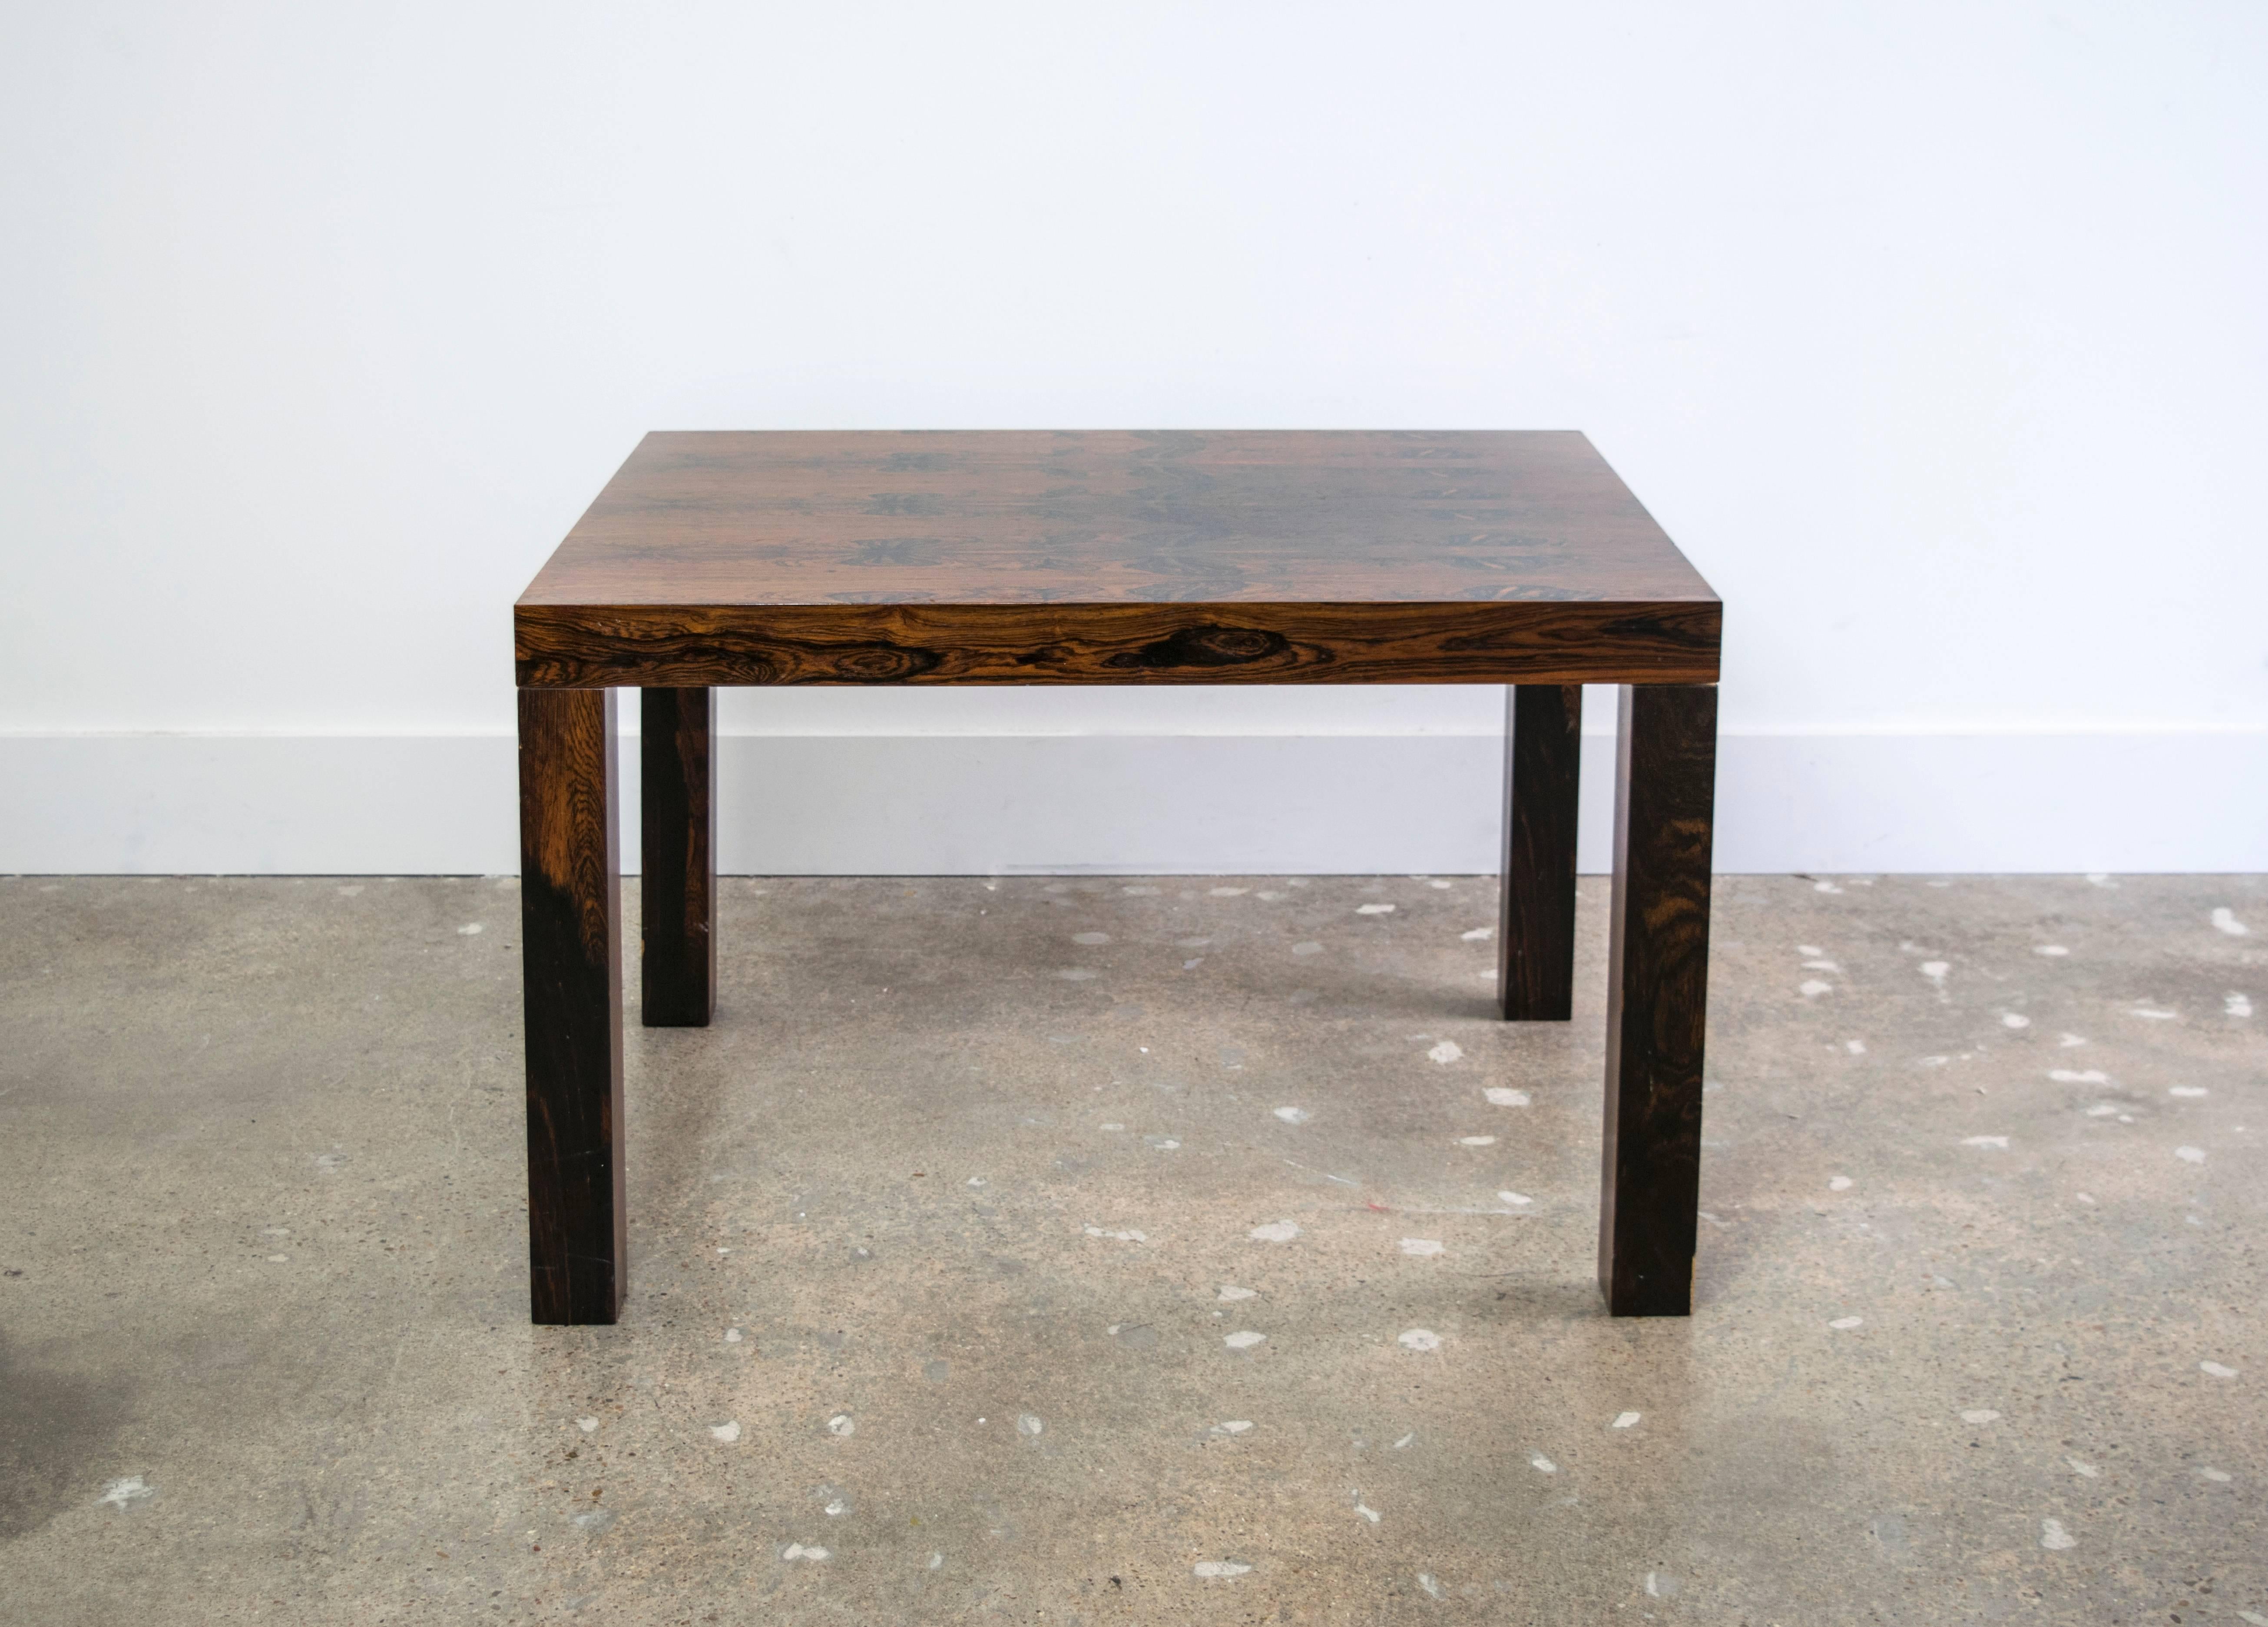 This table has some of the most beautiful patterning in the grain that we've ever seen. Gorgeous, dependable and understated, this side table is the perfect addition to any room.